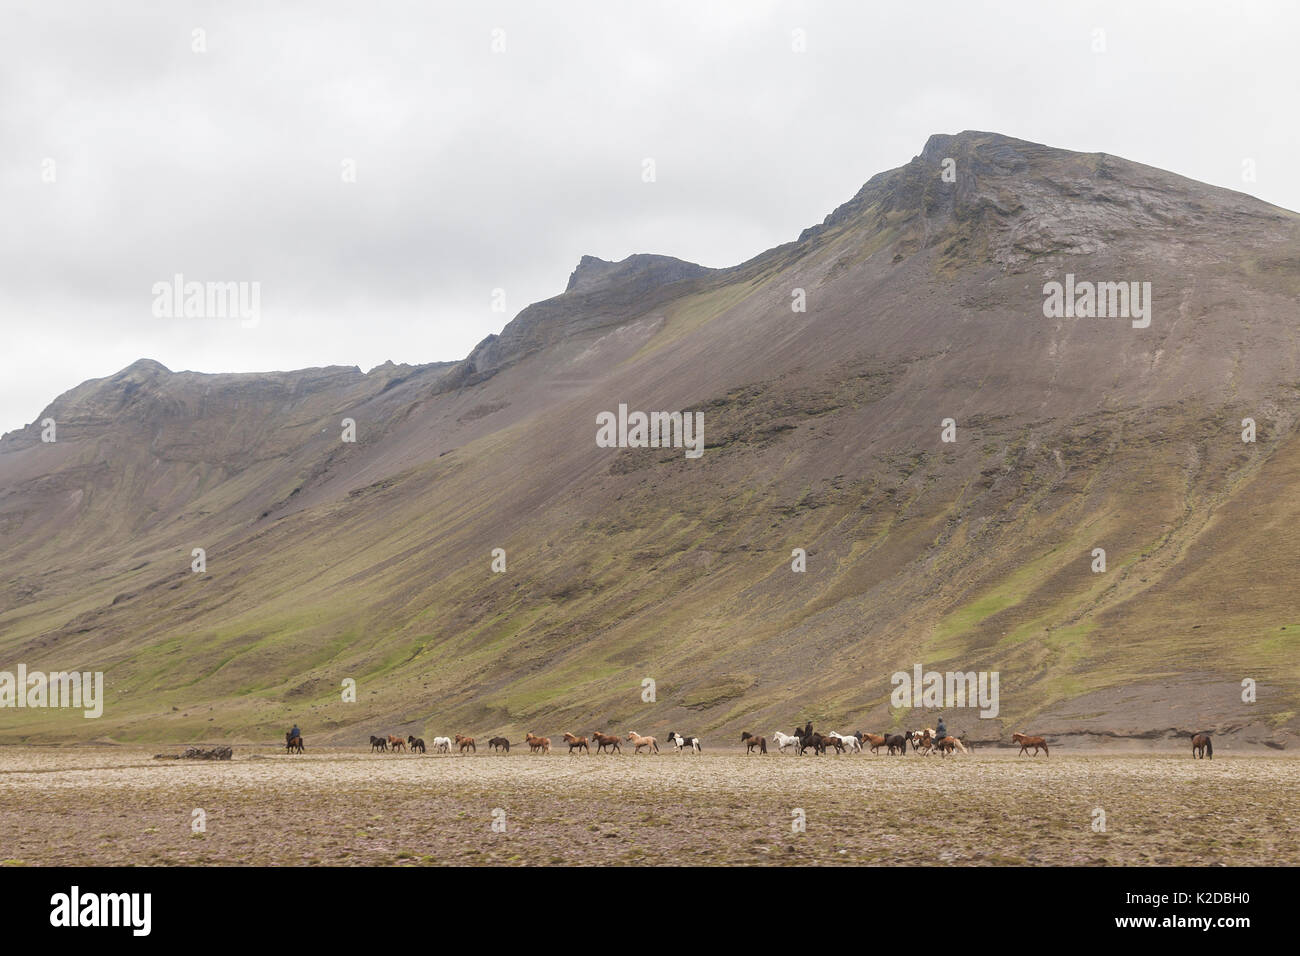 Icelandic landscape with horses in distance, Iceland, July 2012. Stock Photo